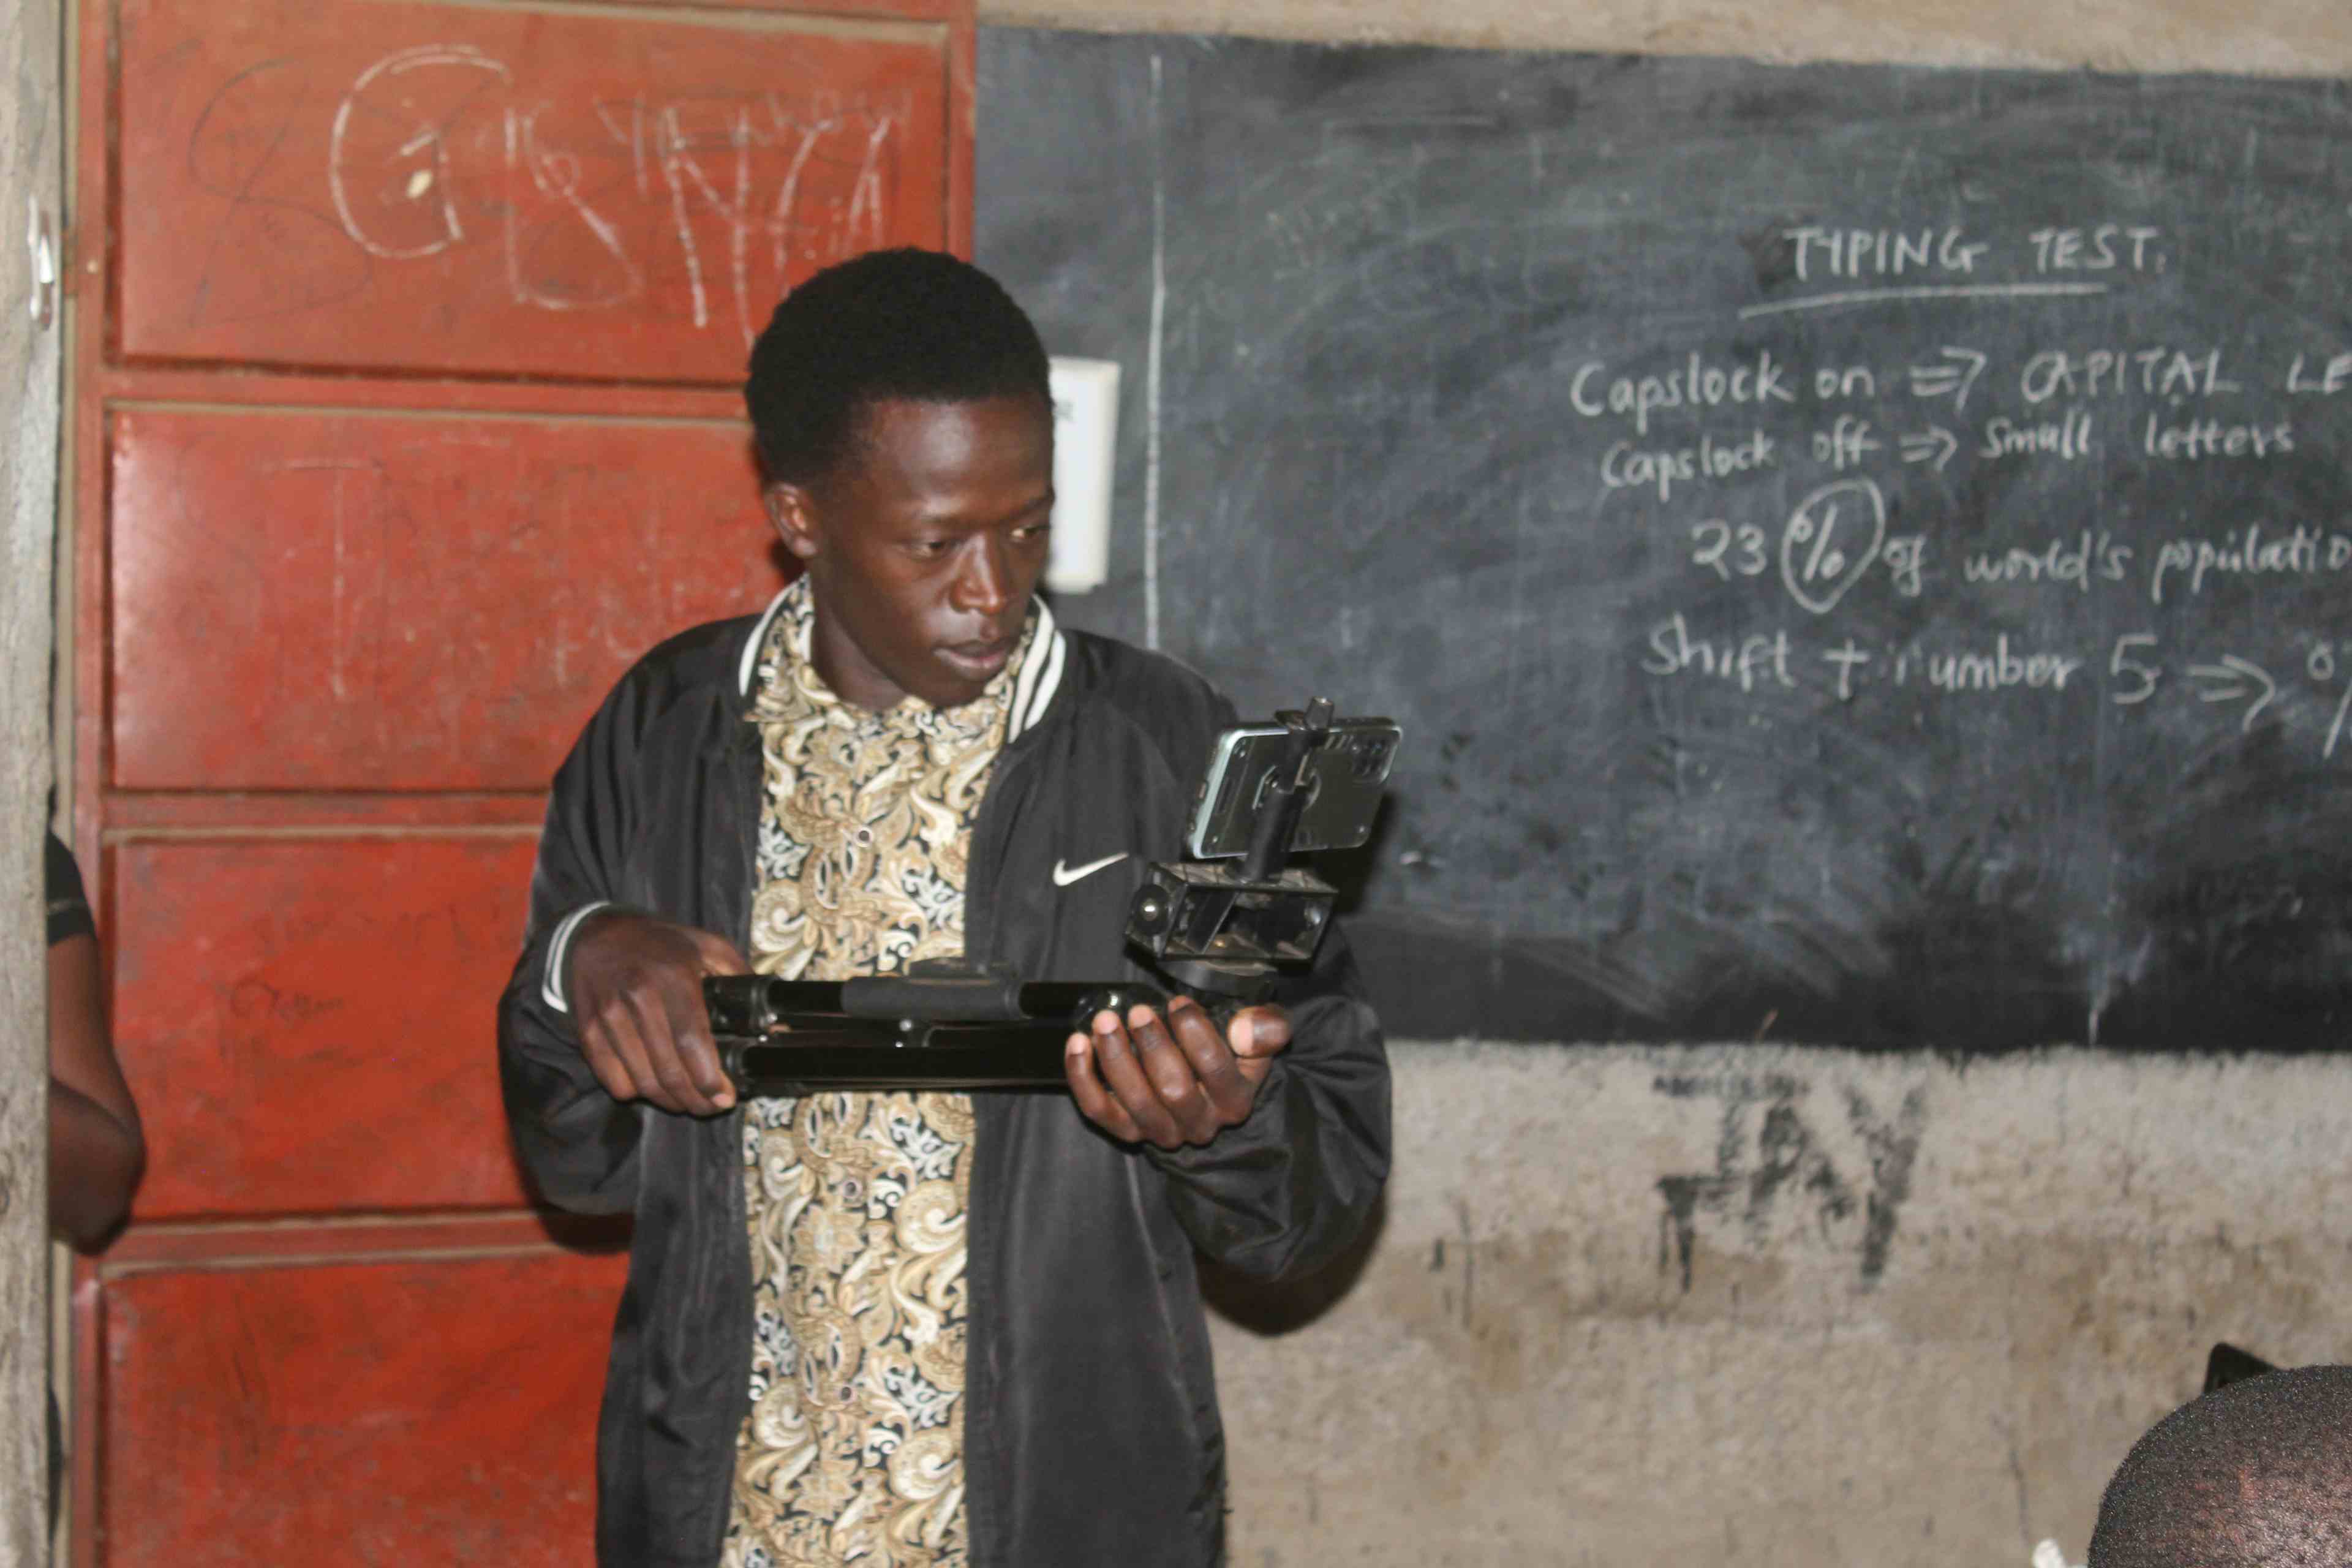 Allan recording for a video production curriculum